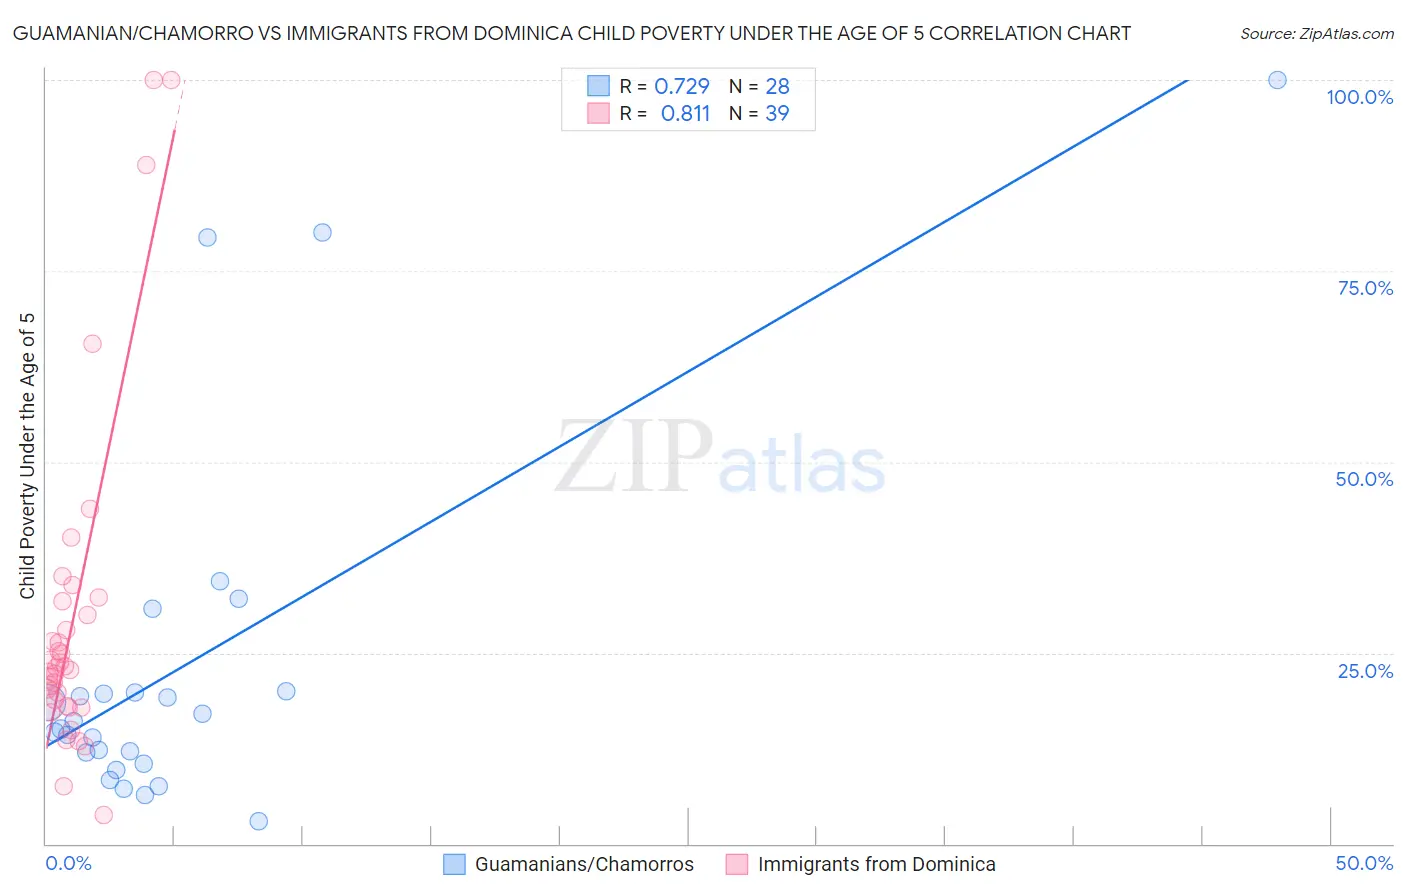 Guamanian/Chamorro vs Immigrants from Dominica Child Poverty Under the Age of 5